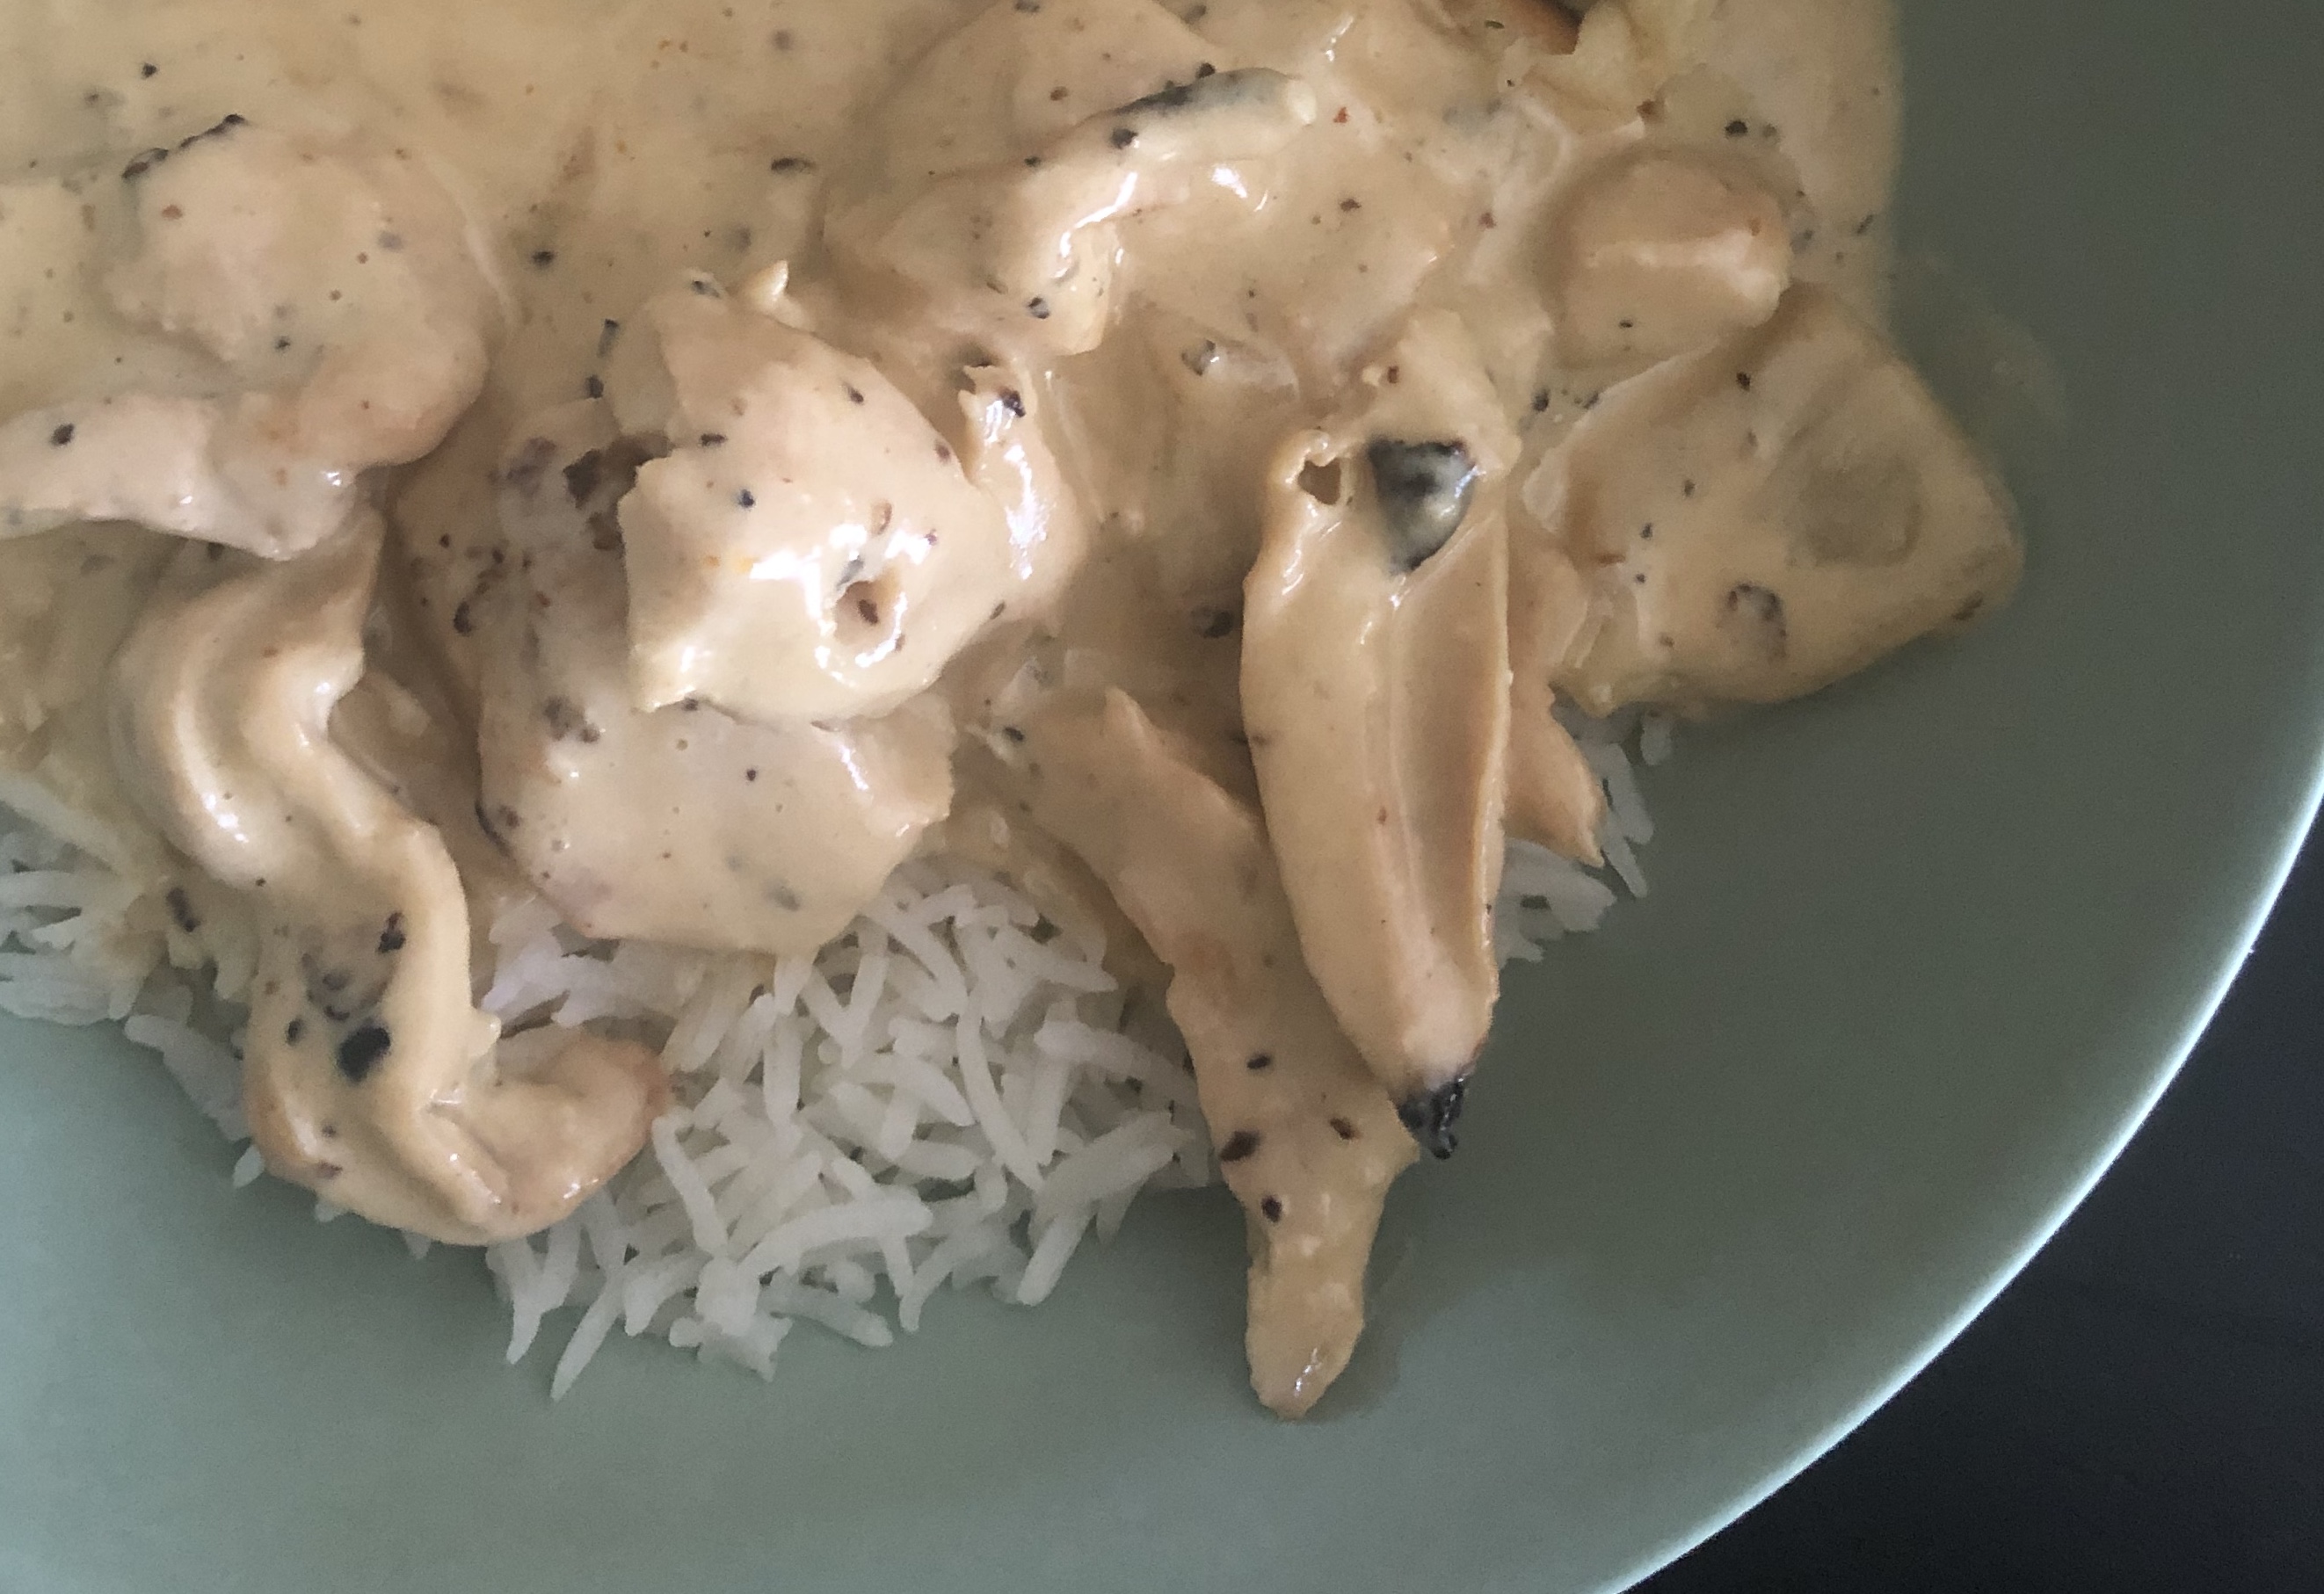 Malai chicken with a white herby sauce is layered over white rice in a light green bowl. Photo by Alyssa Buckley.